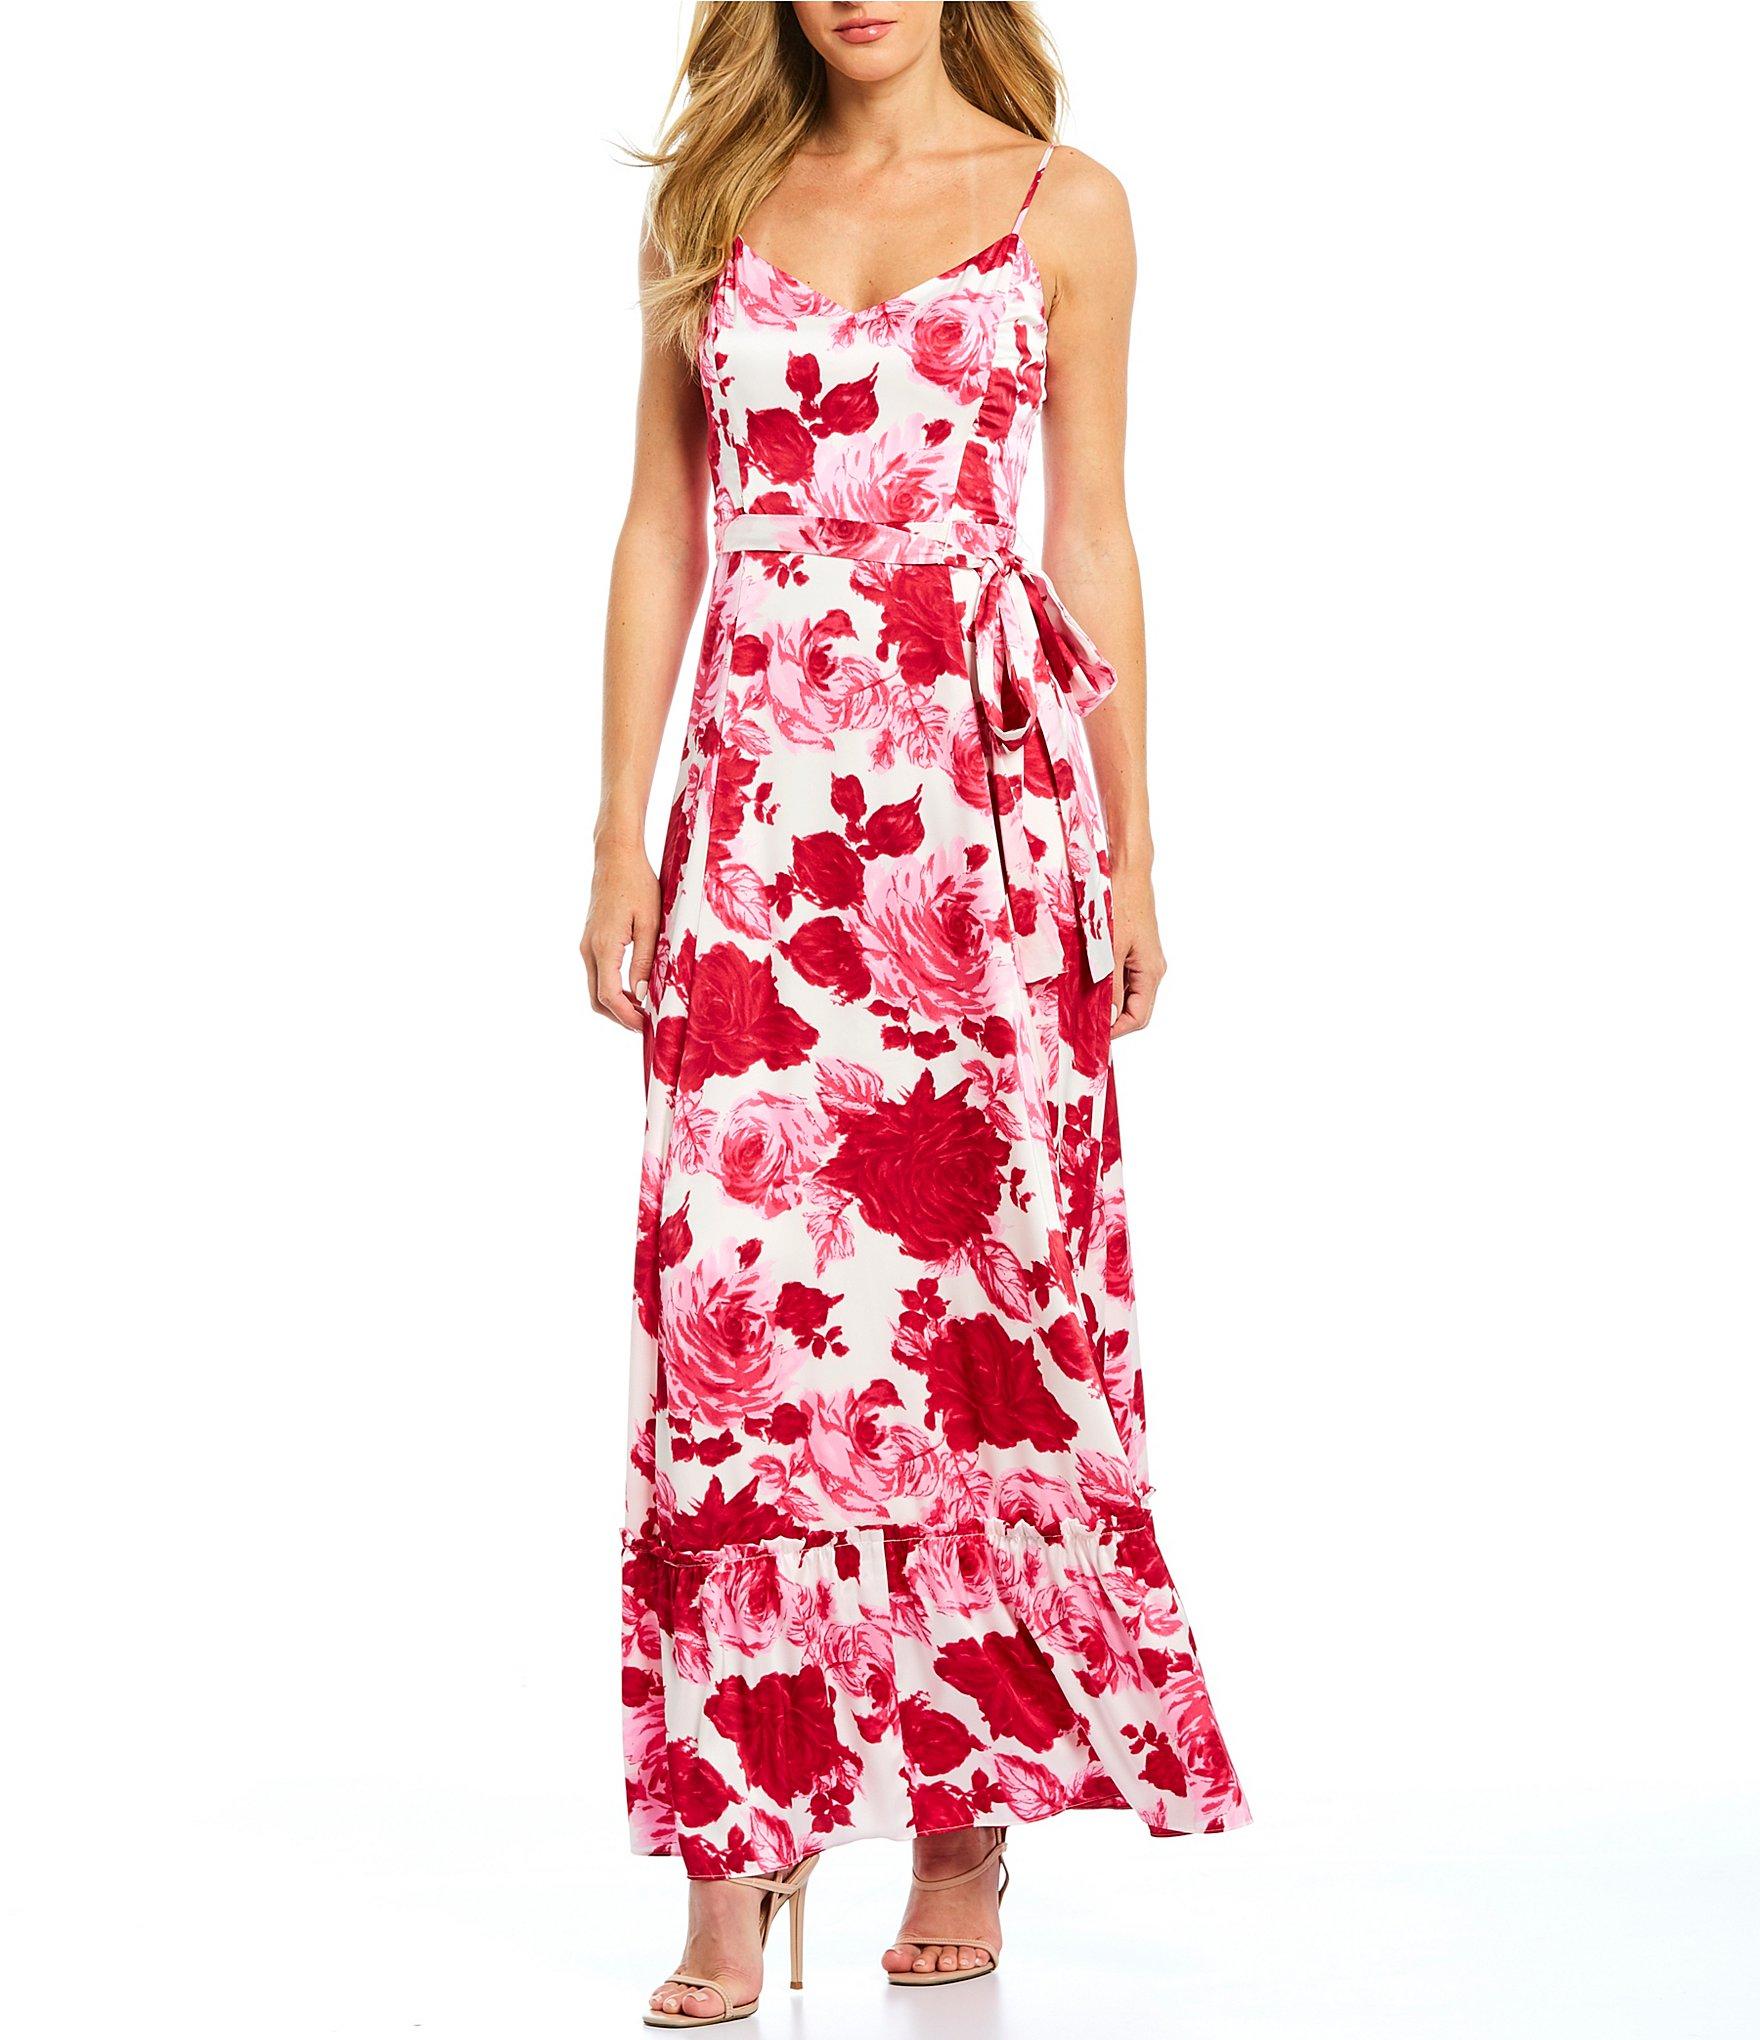 Betsey Johnson Stretch Satin Floral Print Maxi Dress in Pink - Lyst